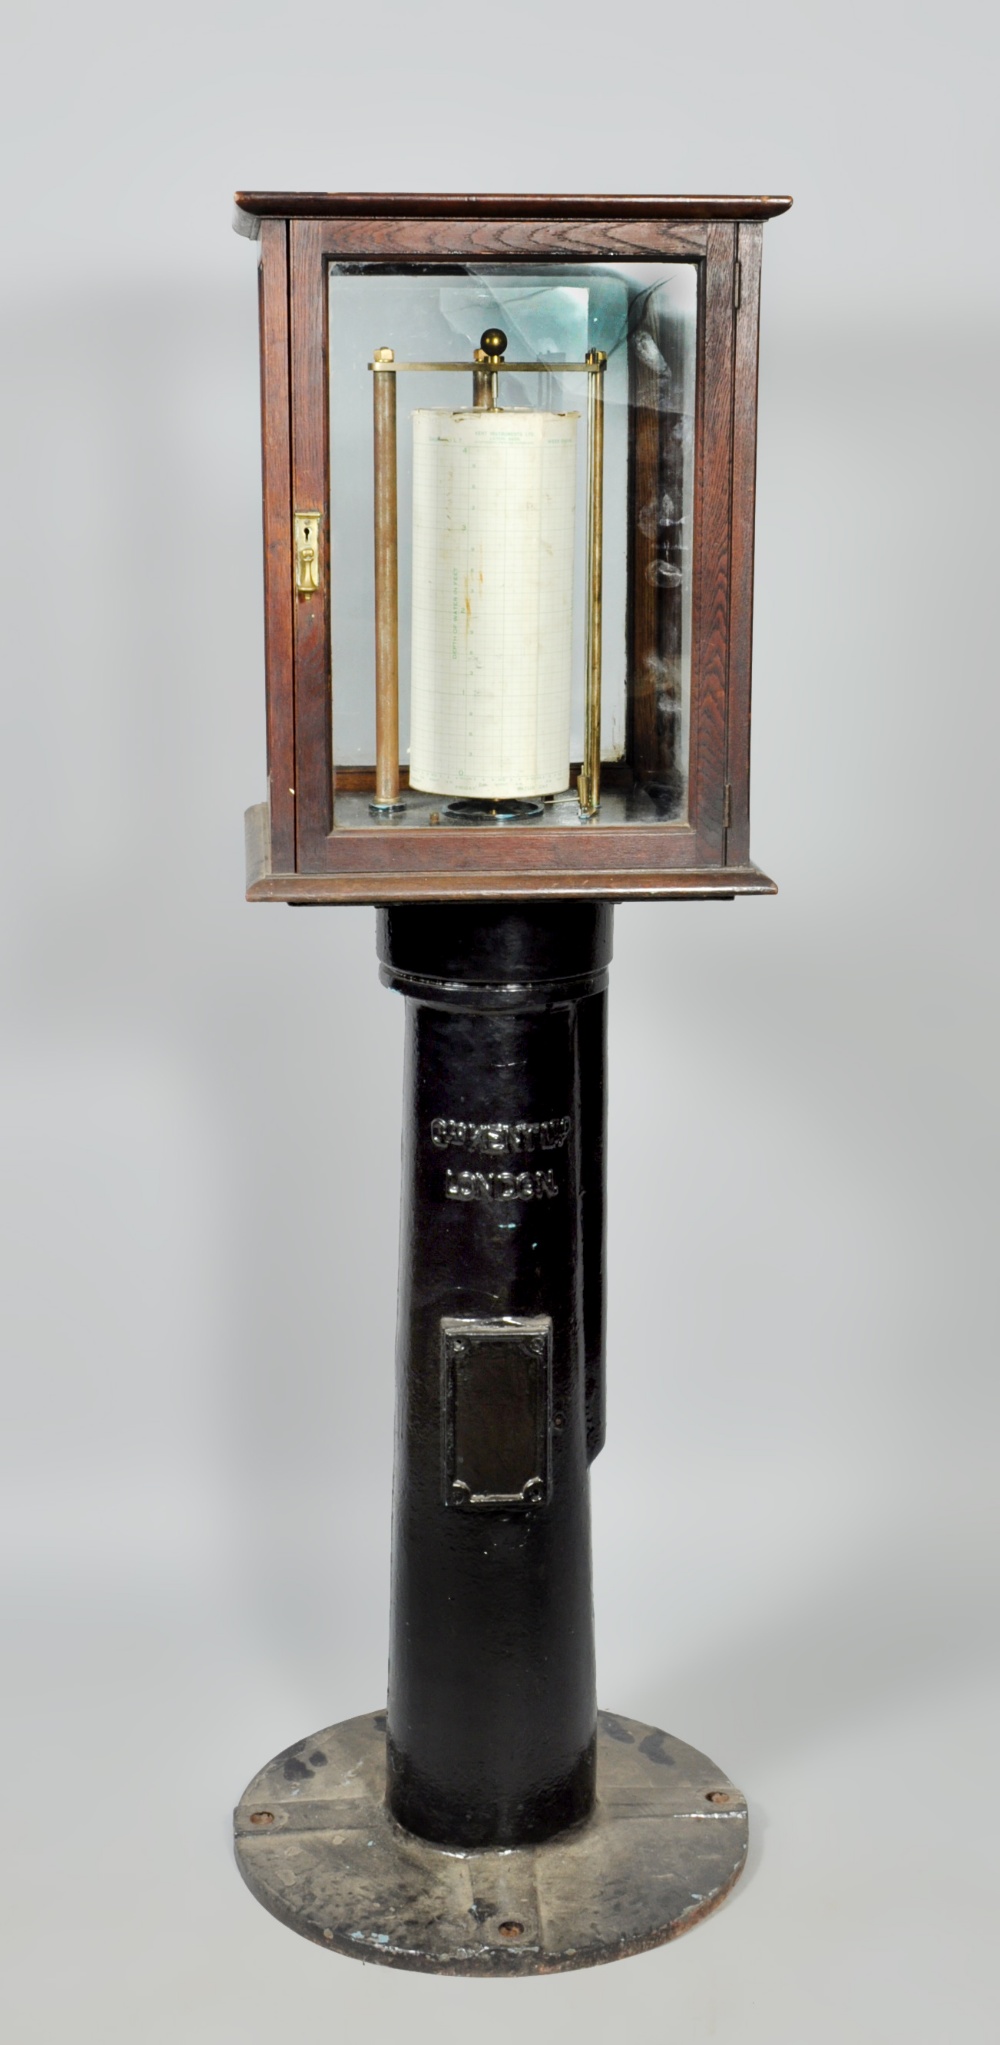 An early 20c water depth recorder by George Kent Ltd, Luton for use in pumping stations, wells etc